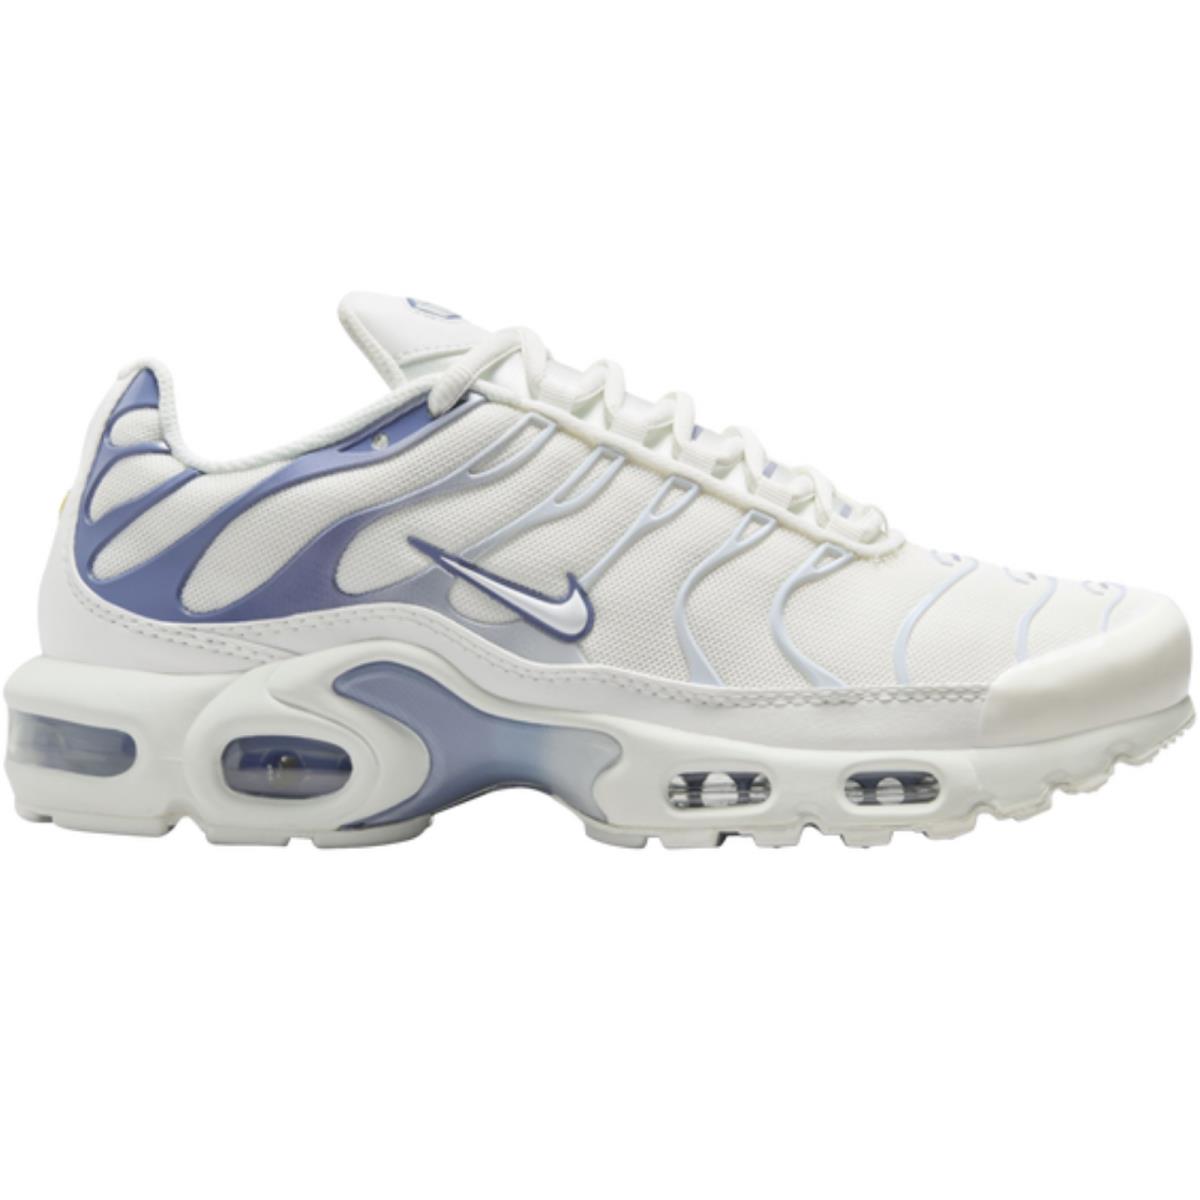 Nike Air Max Plus Women`s Casual Shoes All Colors US Sizes 6-11 Summit White/Light Armory Blue/Football Grey/Ashen